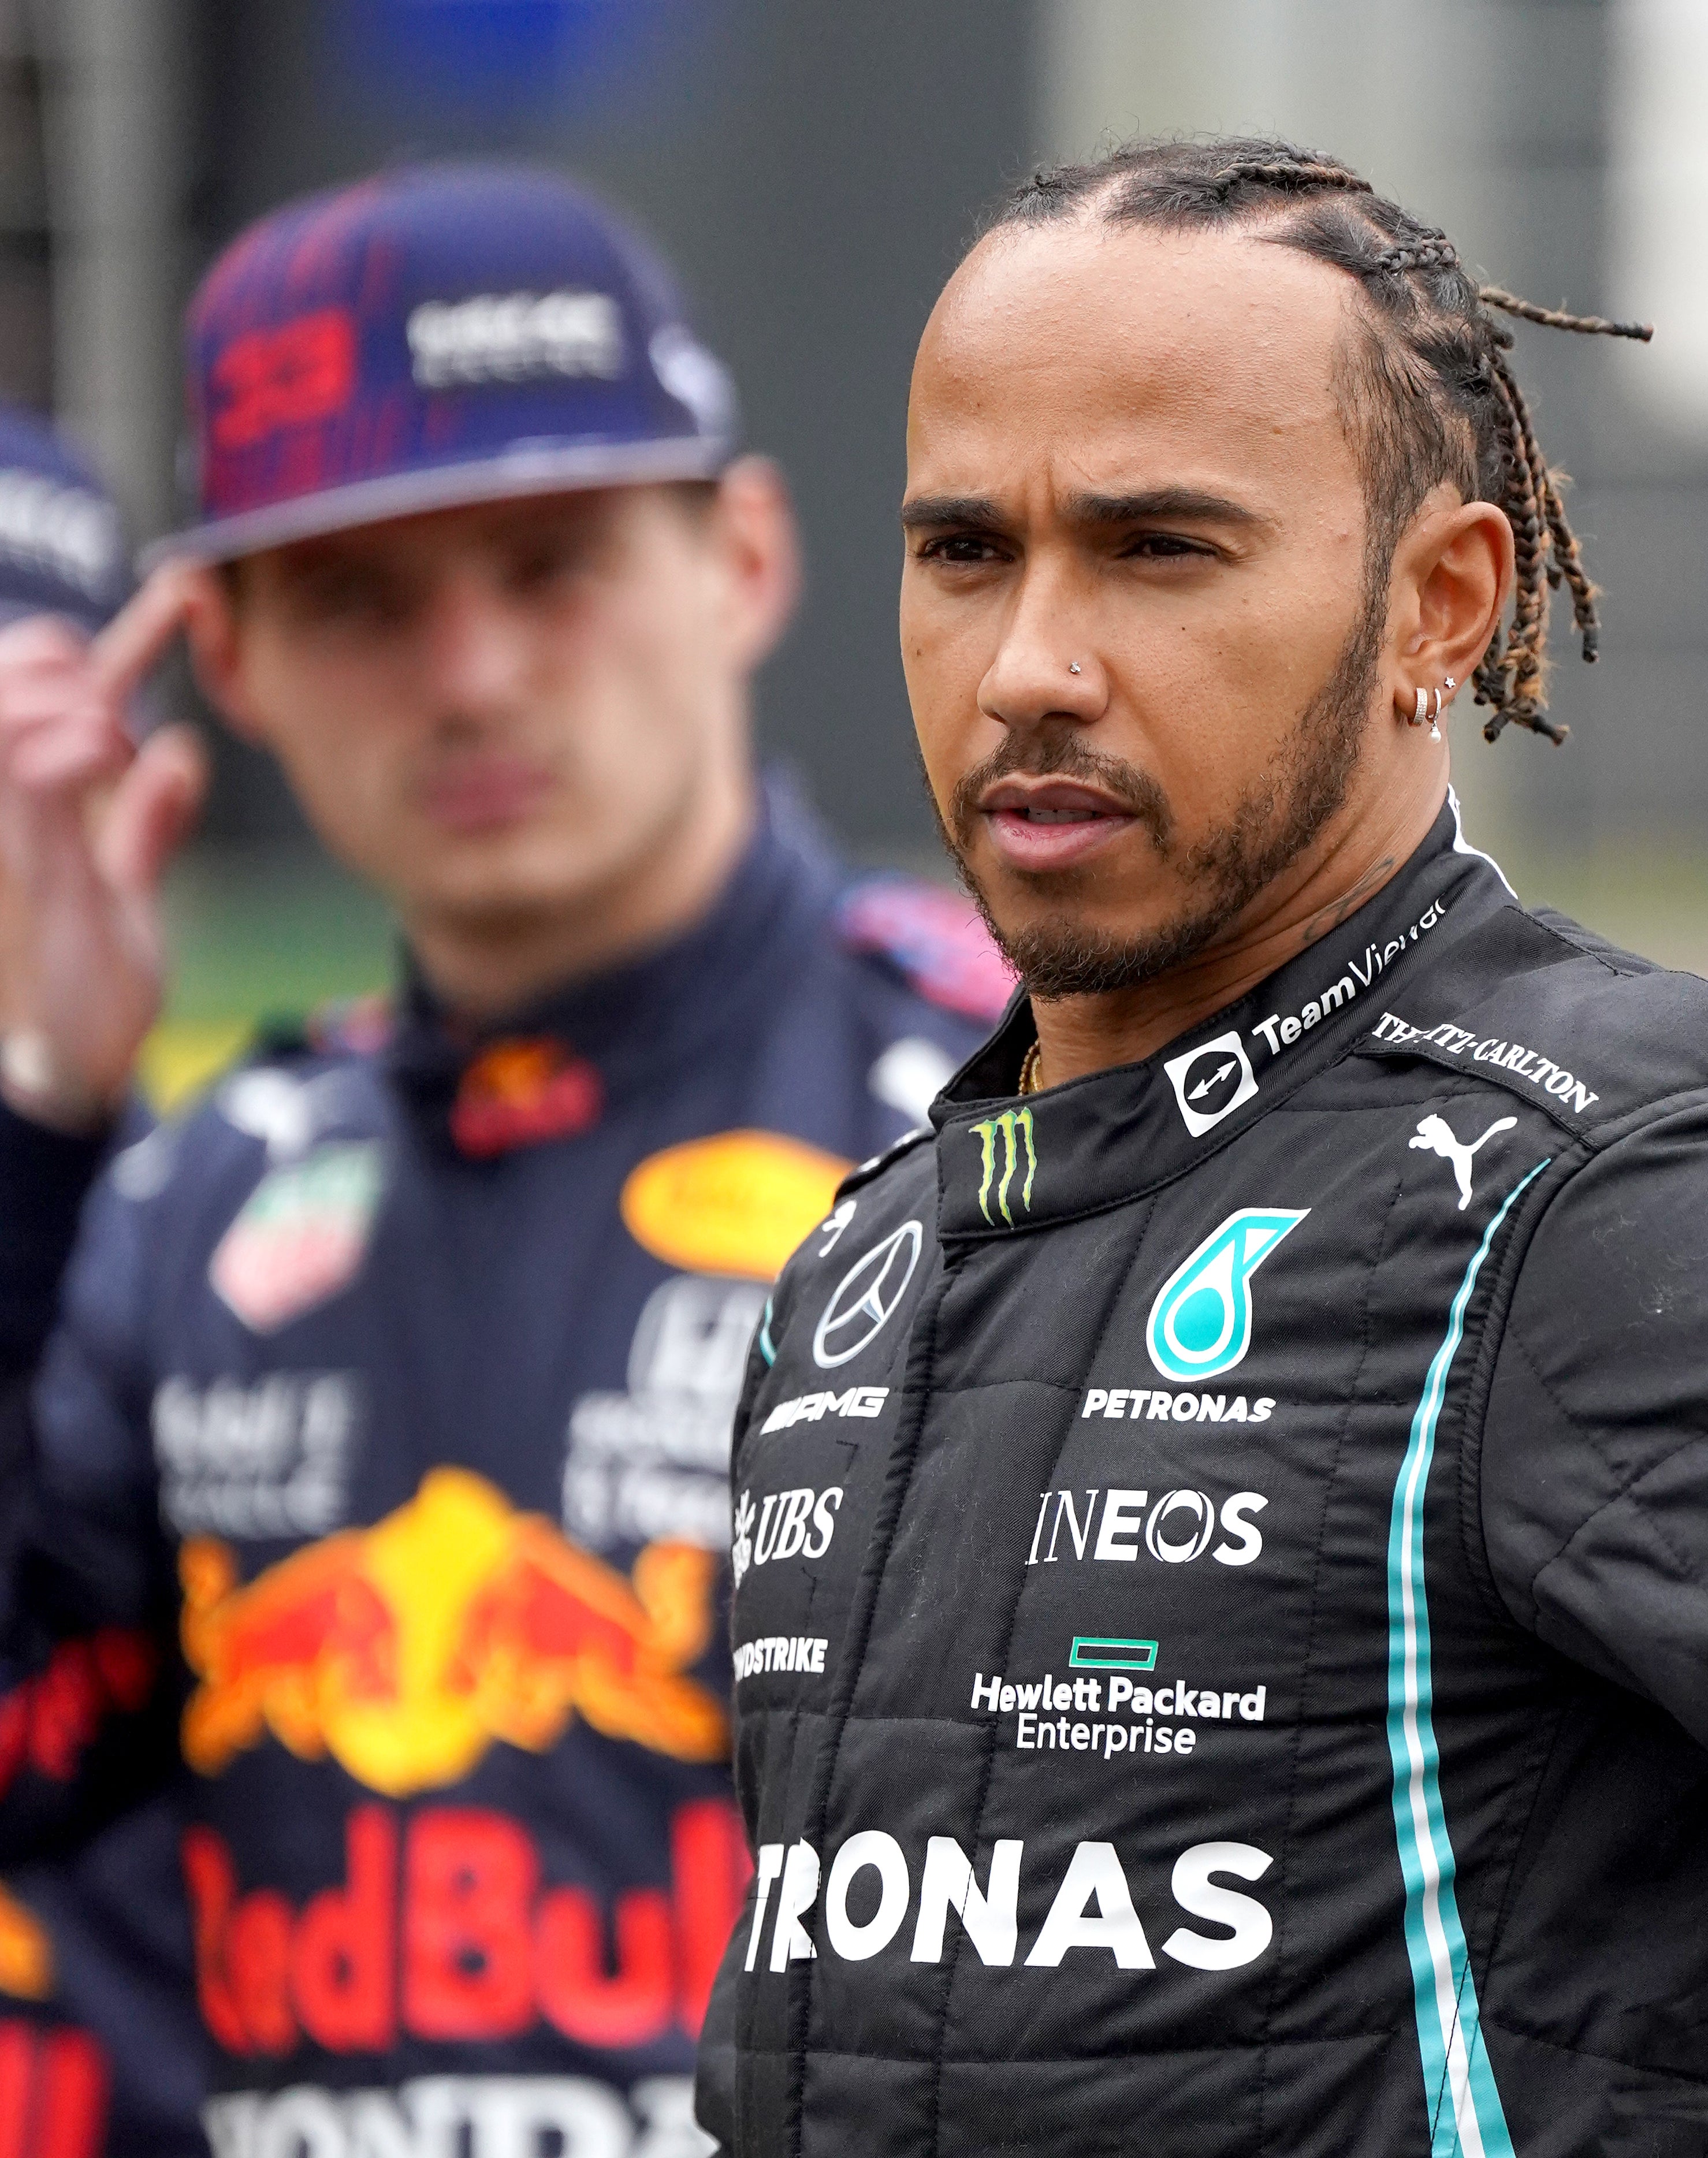 The war of words between Lewis Hamilton and Max Verstappen has continued (Tim Goode/PA)